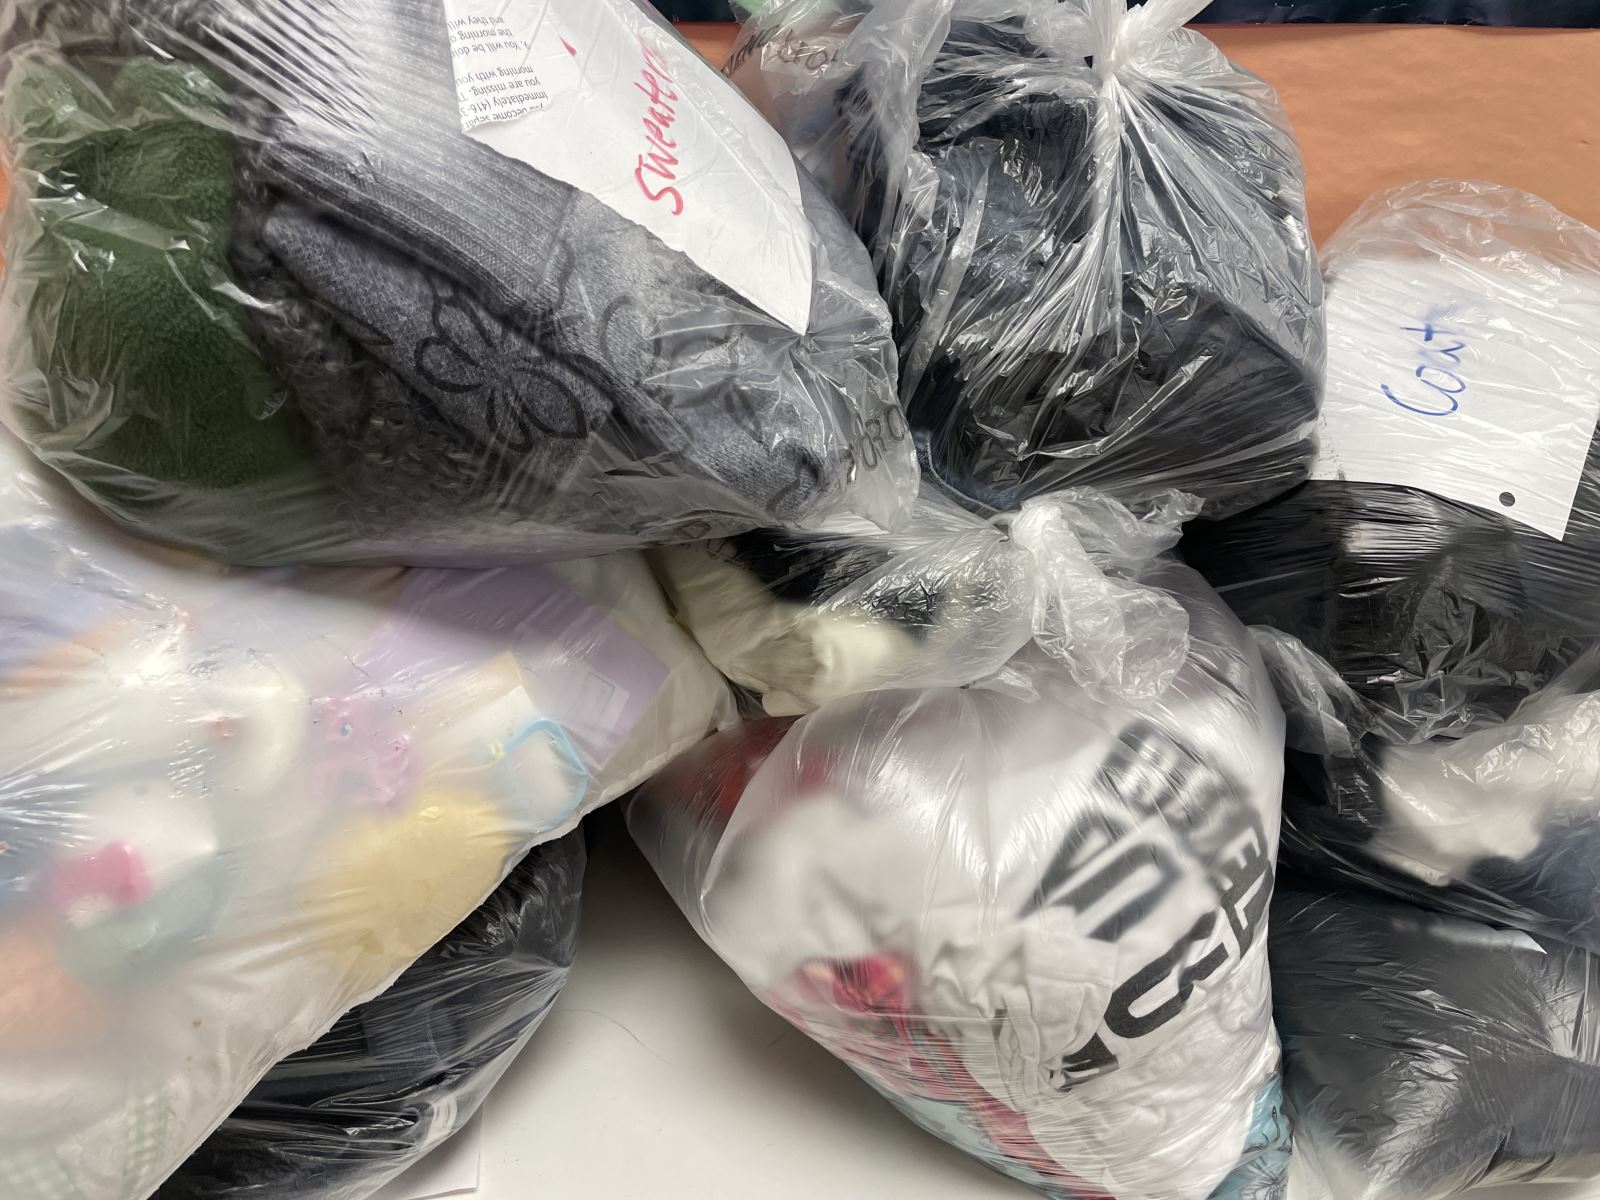 Clear plastic bags containing some of the clothing and textiles donated to Dr. Norman Bethune CI’s Environmental Action Team’s 2023 Clothing and Textiles Drive.